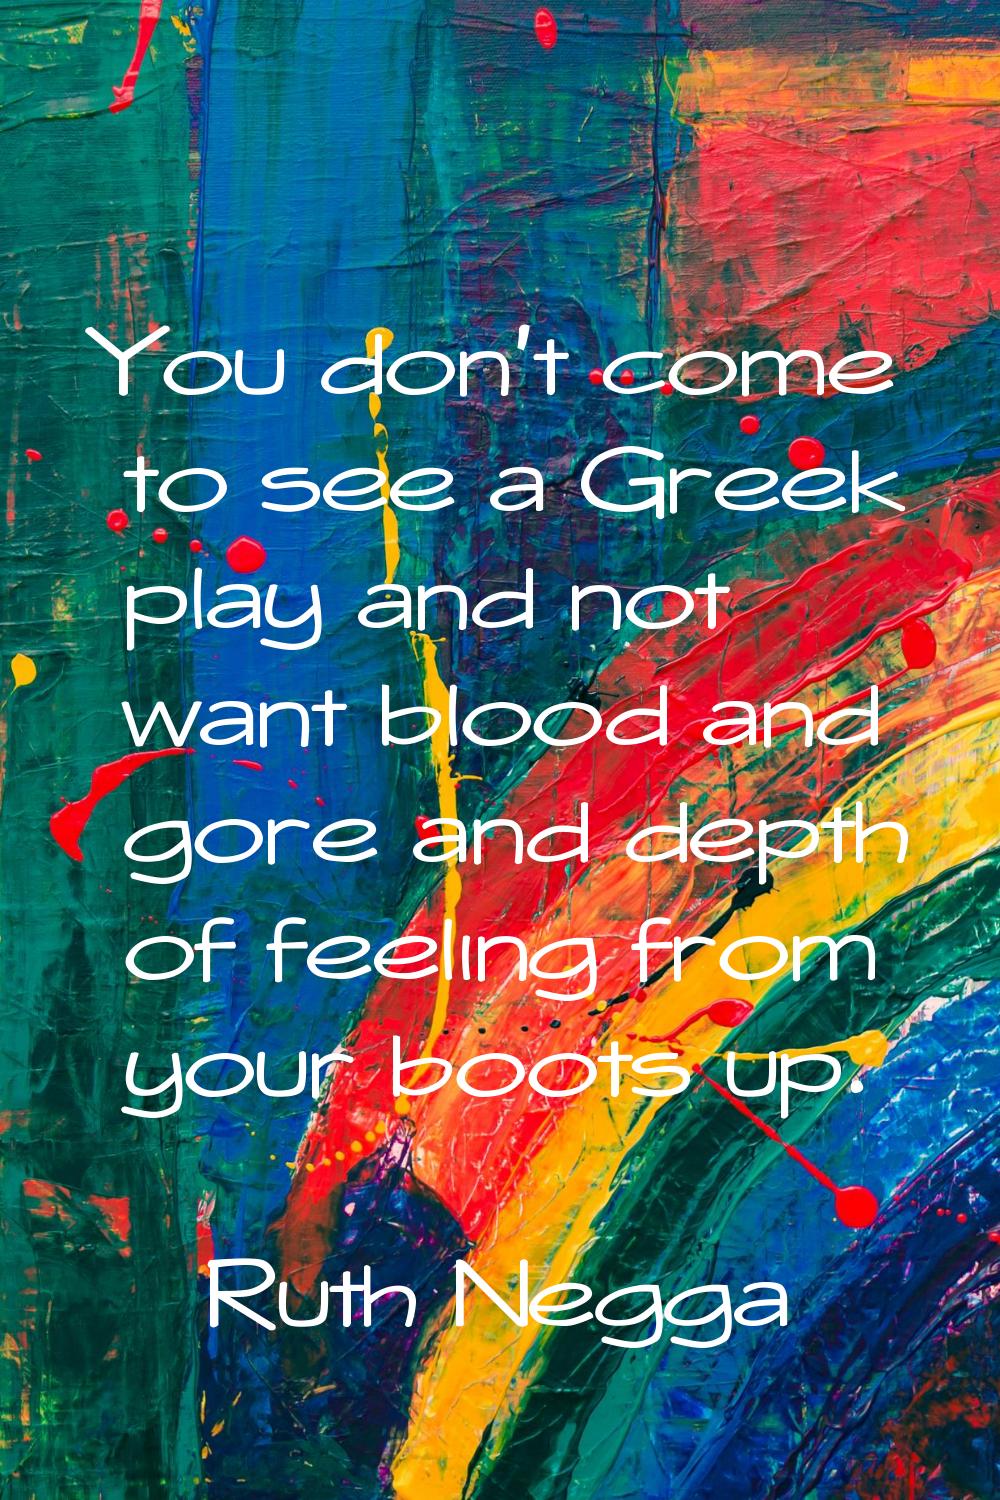 You don't come to see a Greek play and not want blood and gore and depth of feeling from your boots